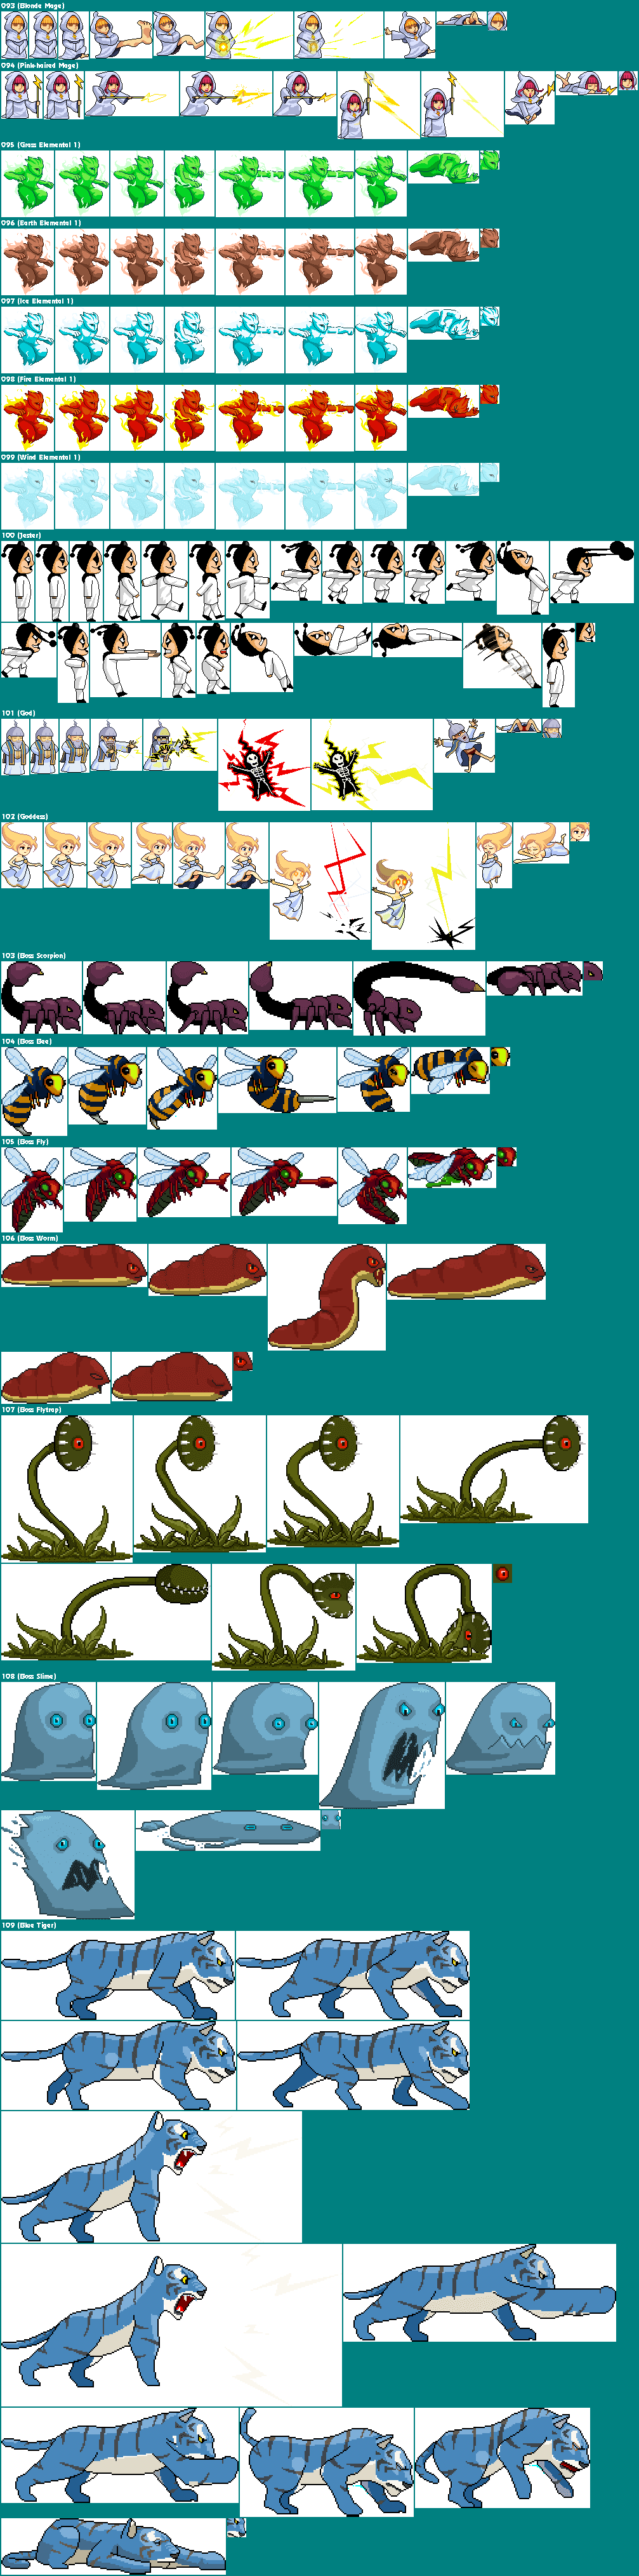 "World of Mighty Fighter" Enemies (6/7)